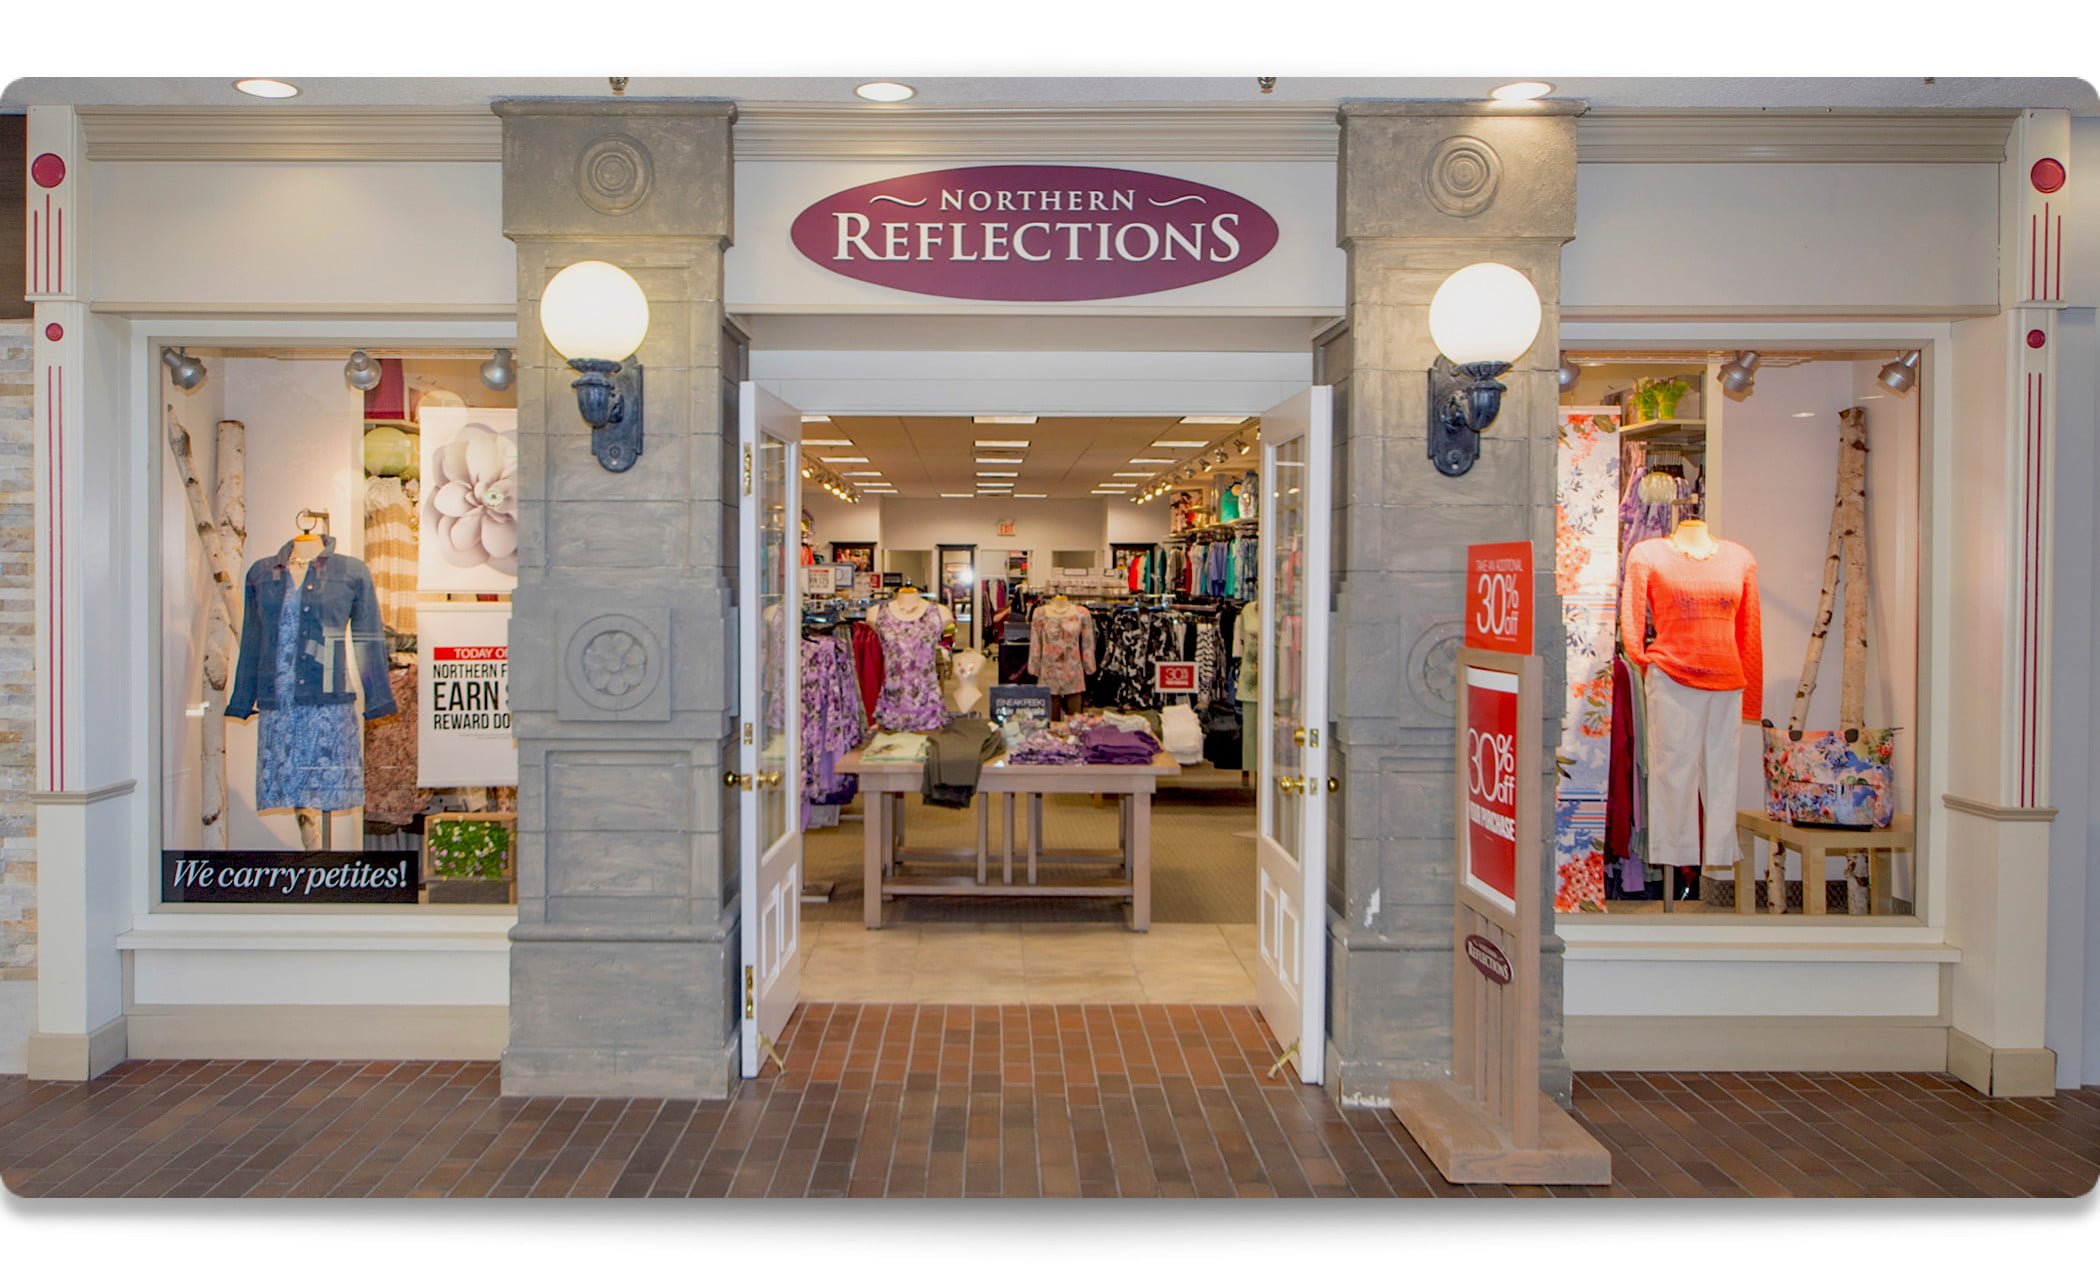 With so many great deals in-store - Northern Reflections